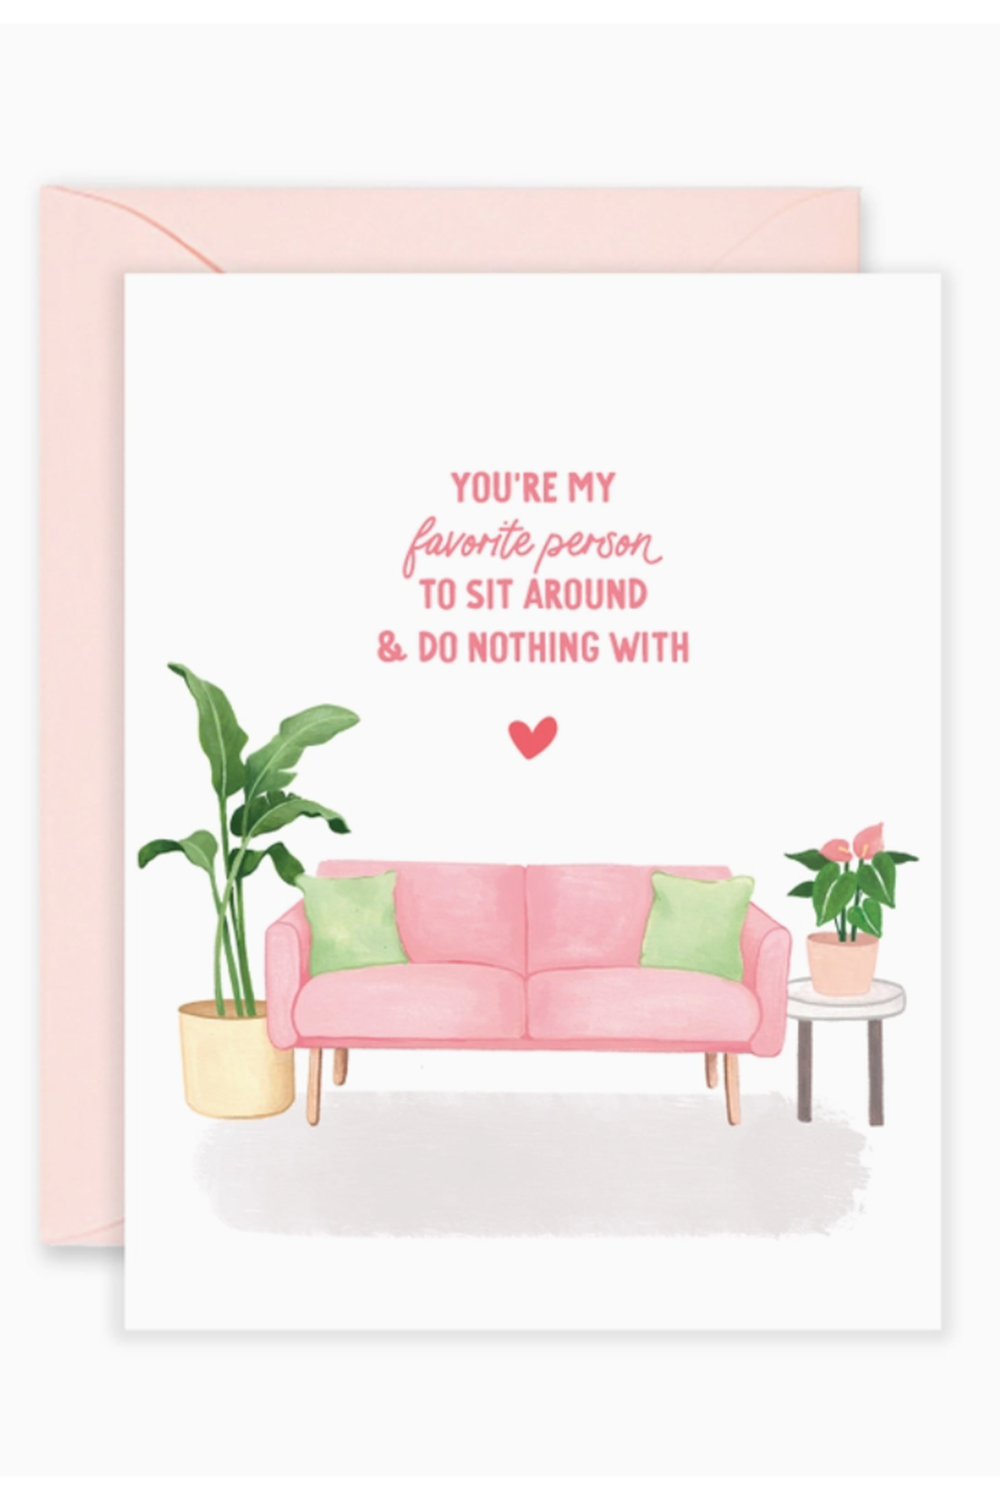 Isabella Single Valentine's Day Card - Fave Person Couch